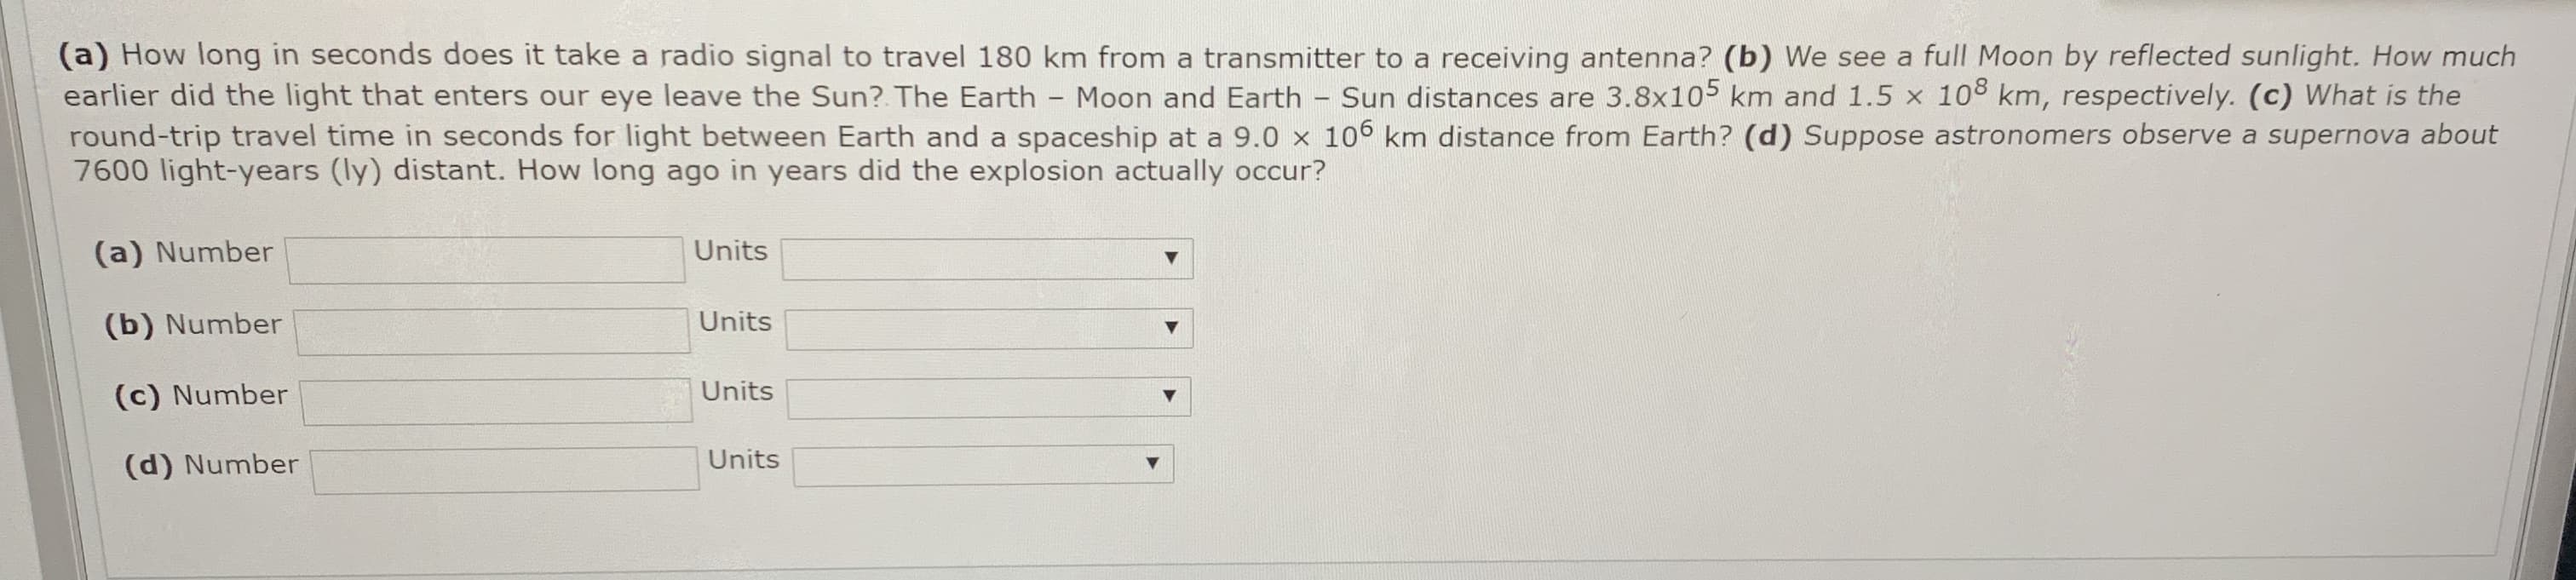 (a) How long in seconds does it take a radio signal to travel 180 km from a transmitter to a receiving antenna? (b) We see a full Moon by reflected sunlight. How much
earlier did the light that enters our eye leave the Sun? The Earth - Moon and Earth - Sun distances are 3.8x105 km and 1.5 x 108 km, respectively. (c) What is the
round-trip travel time in seconds for light between Earth and a spaceship at a 9.0 x 106 km distance from Earth? (d) Suppose astronomers observe a supernova about
7600 light-years (ly) distant. How long ago in years did the explosion actually occur?
(a) Number
Units
(b) Number
Units
(c) Number
Units
(d) Number
Units
